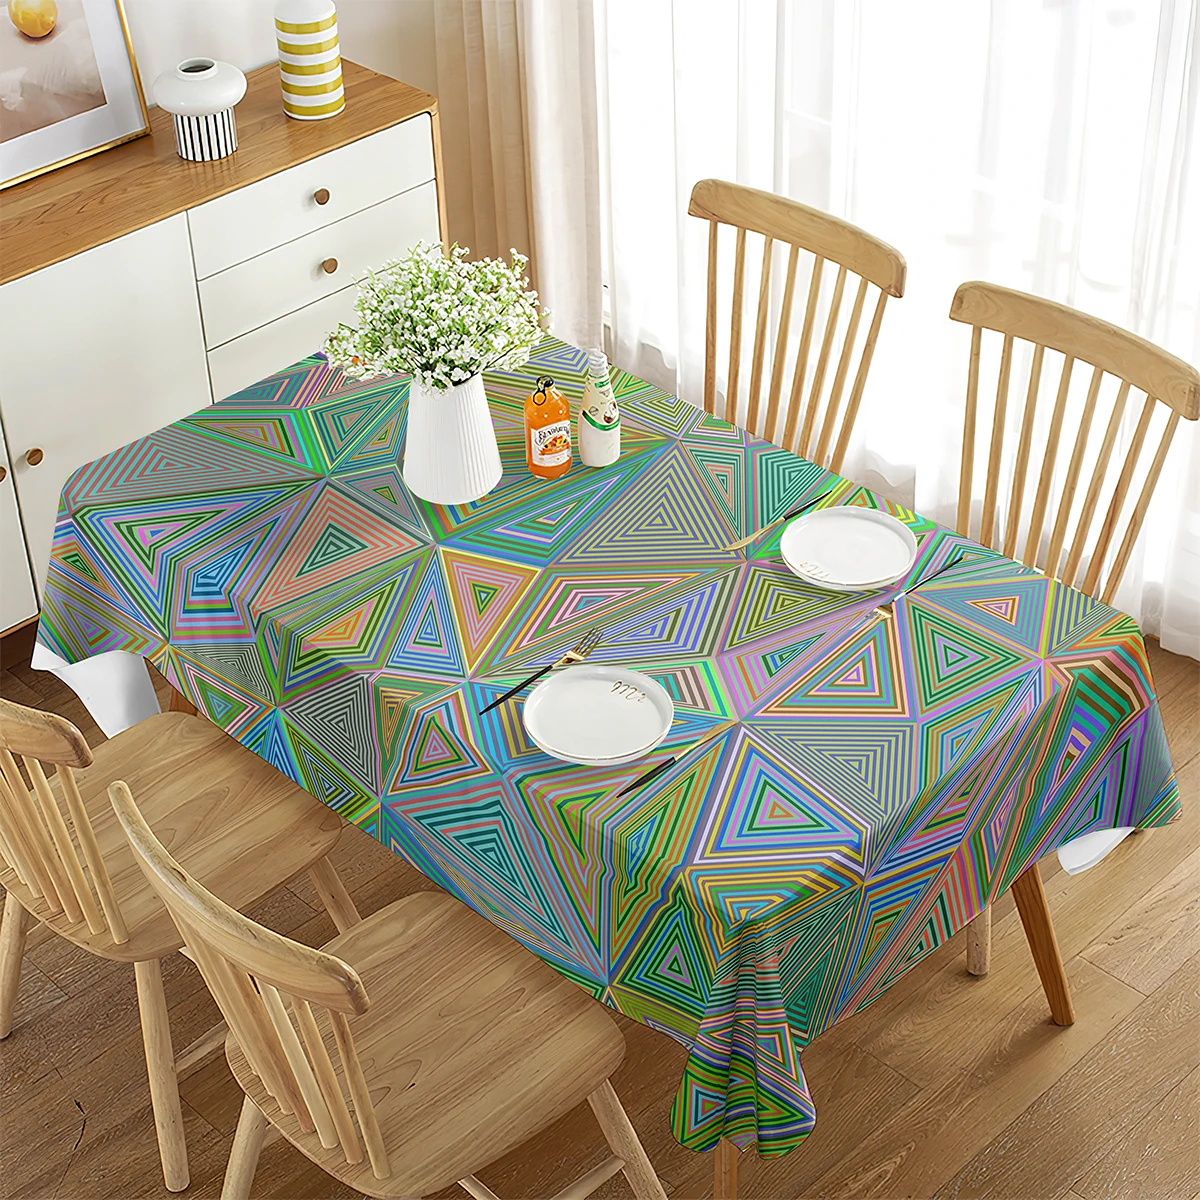 

Abstract Tablecloth, Mosaic Style Stained Fractal Colorful Geometric Triangle Image, Dining Room Kitchen Rectangular Table Cover